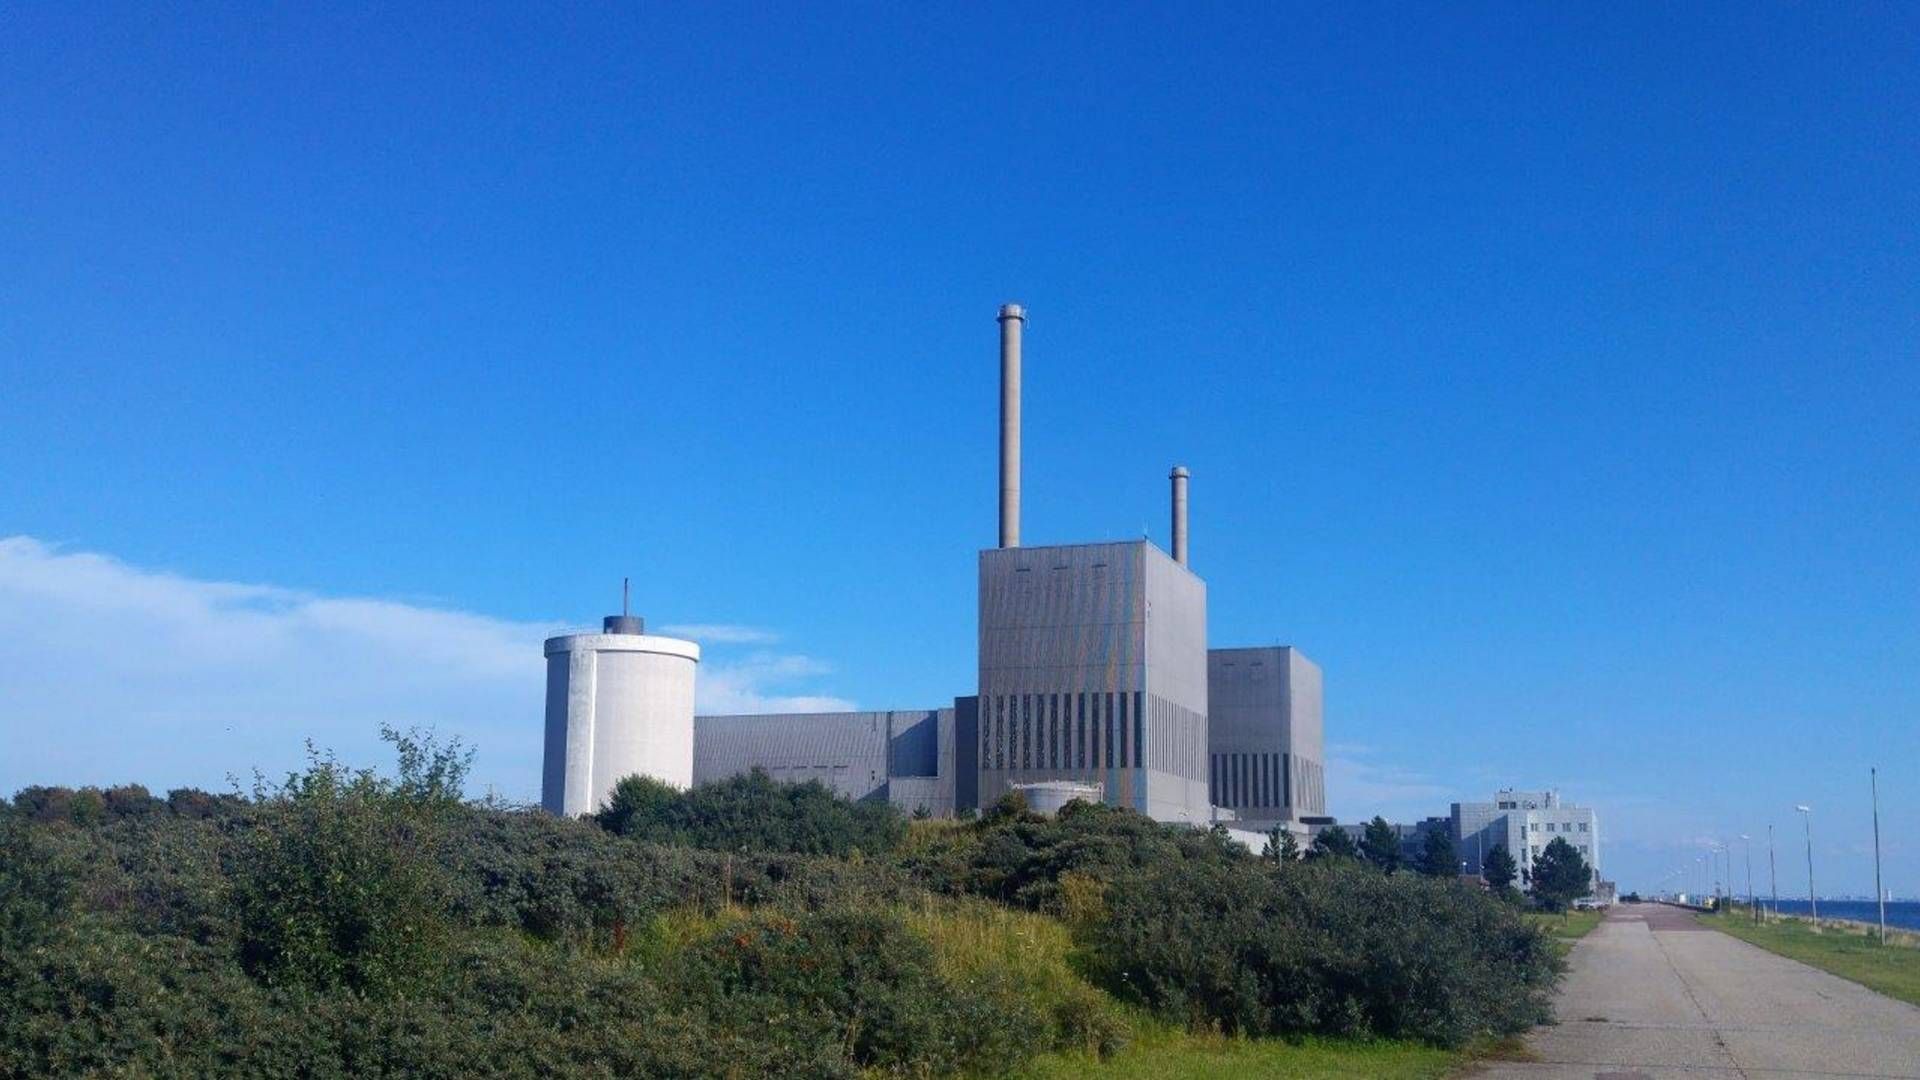 Nuclear power plant Barsebäck, which closed in 2005. Now, the owners seek to build a new facility 15 kilometers away. | Photo: PR / Uniper